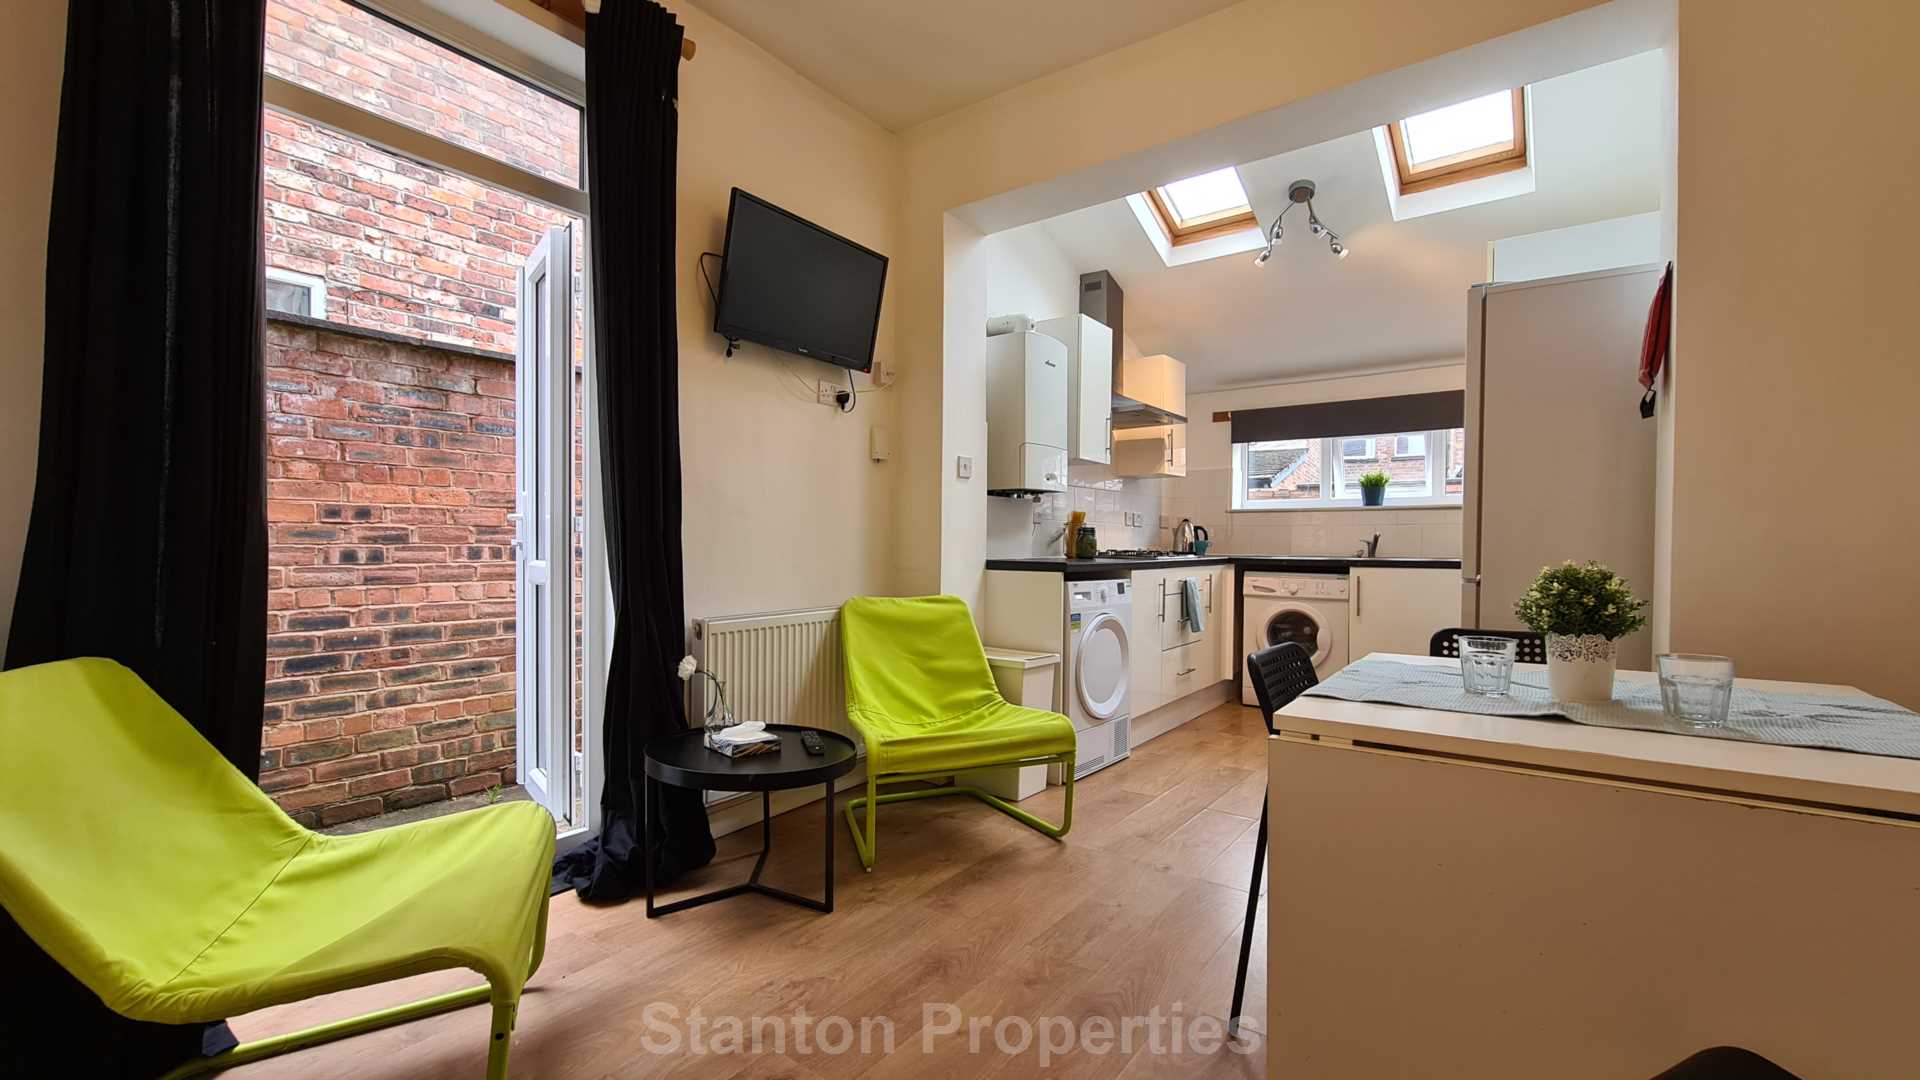 £130 pppw, See Video Tour, Mabfield Road, Fallowfield, Image 14